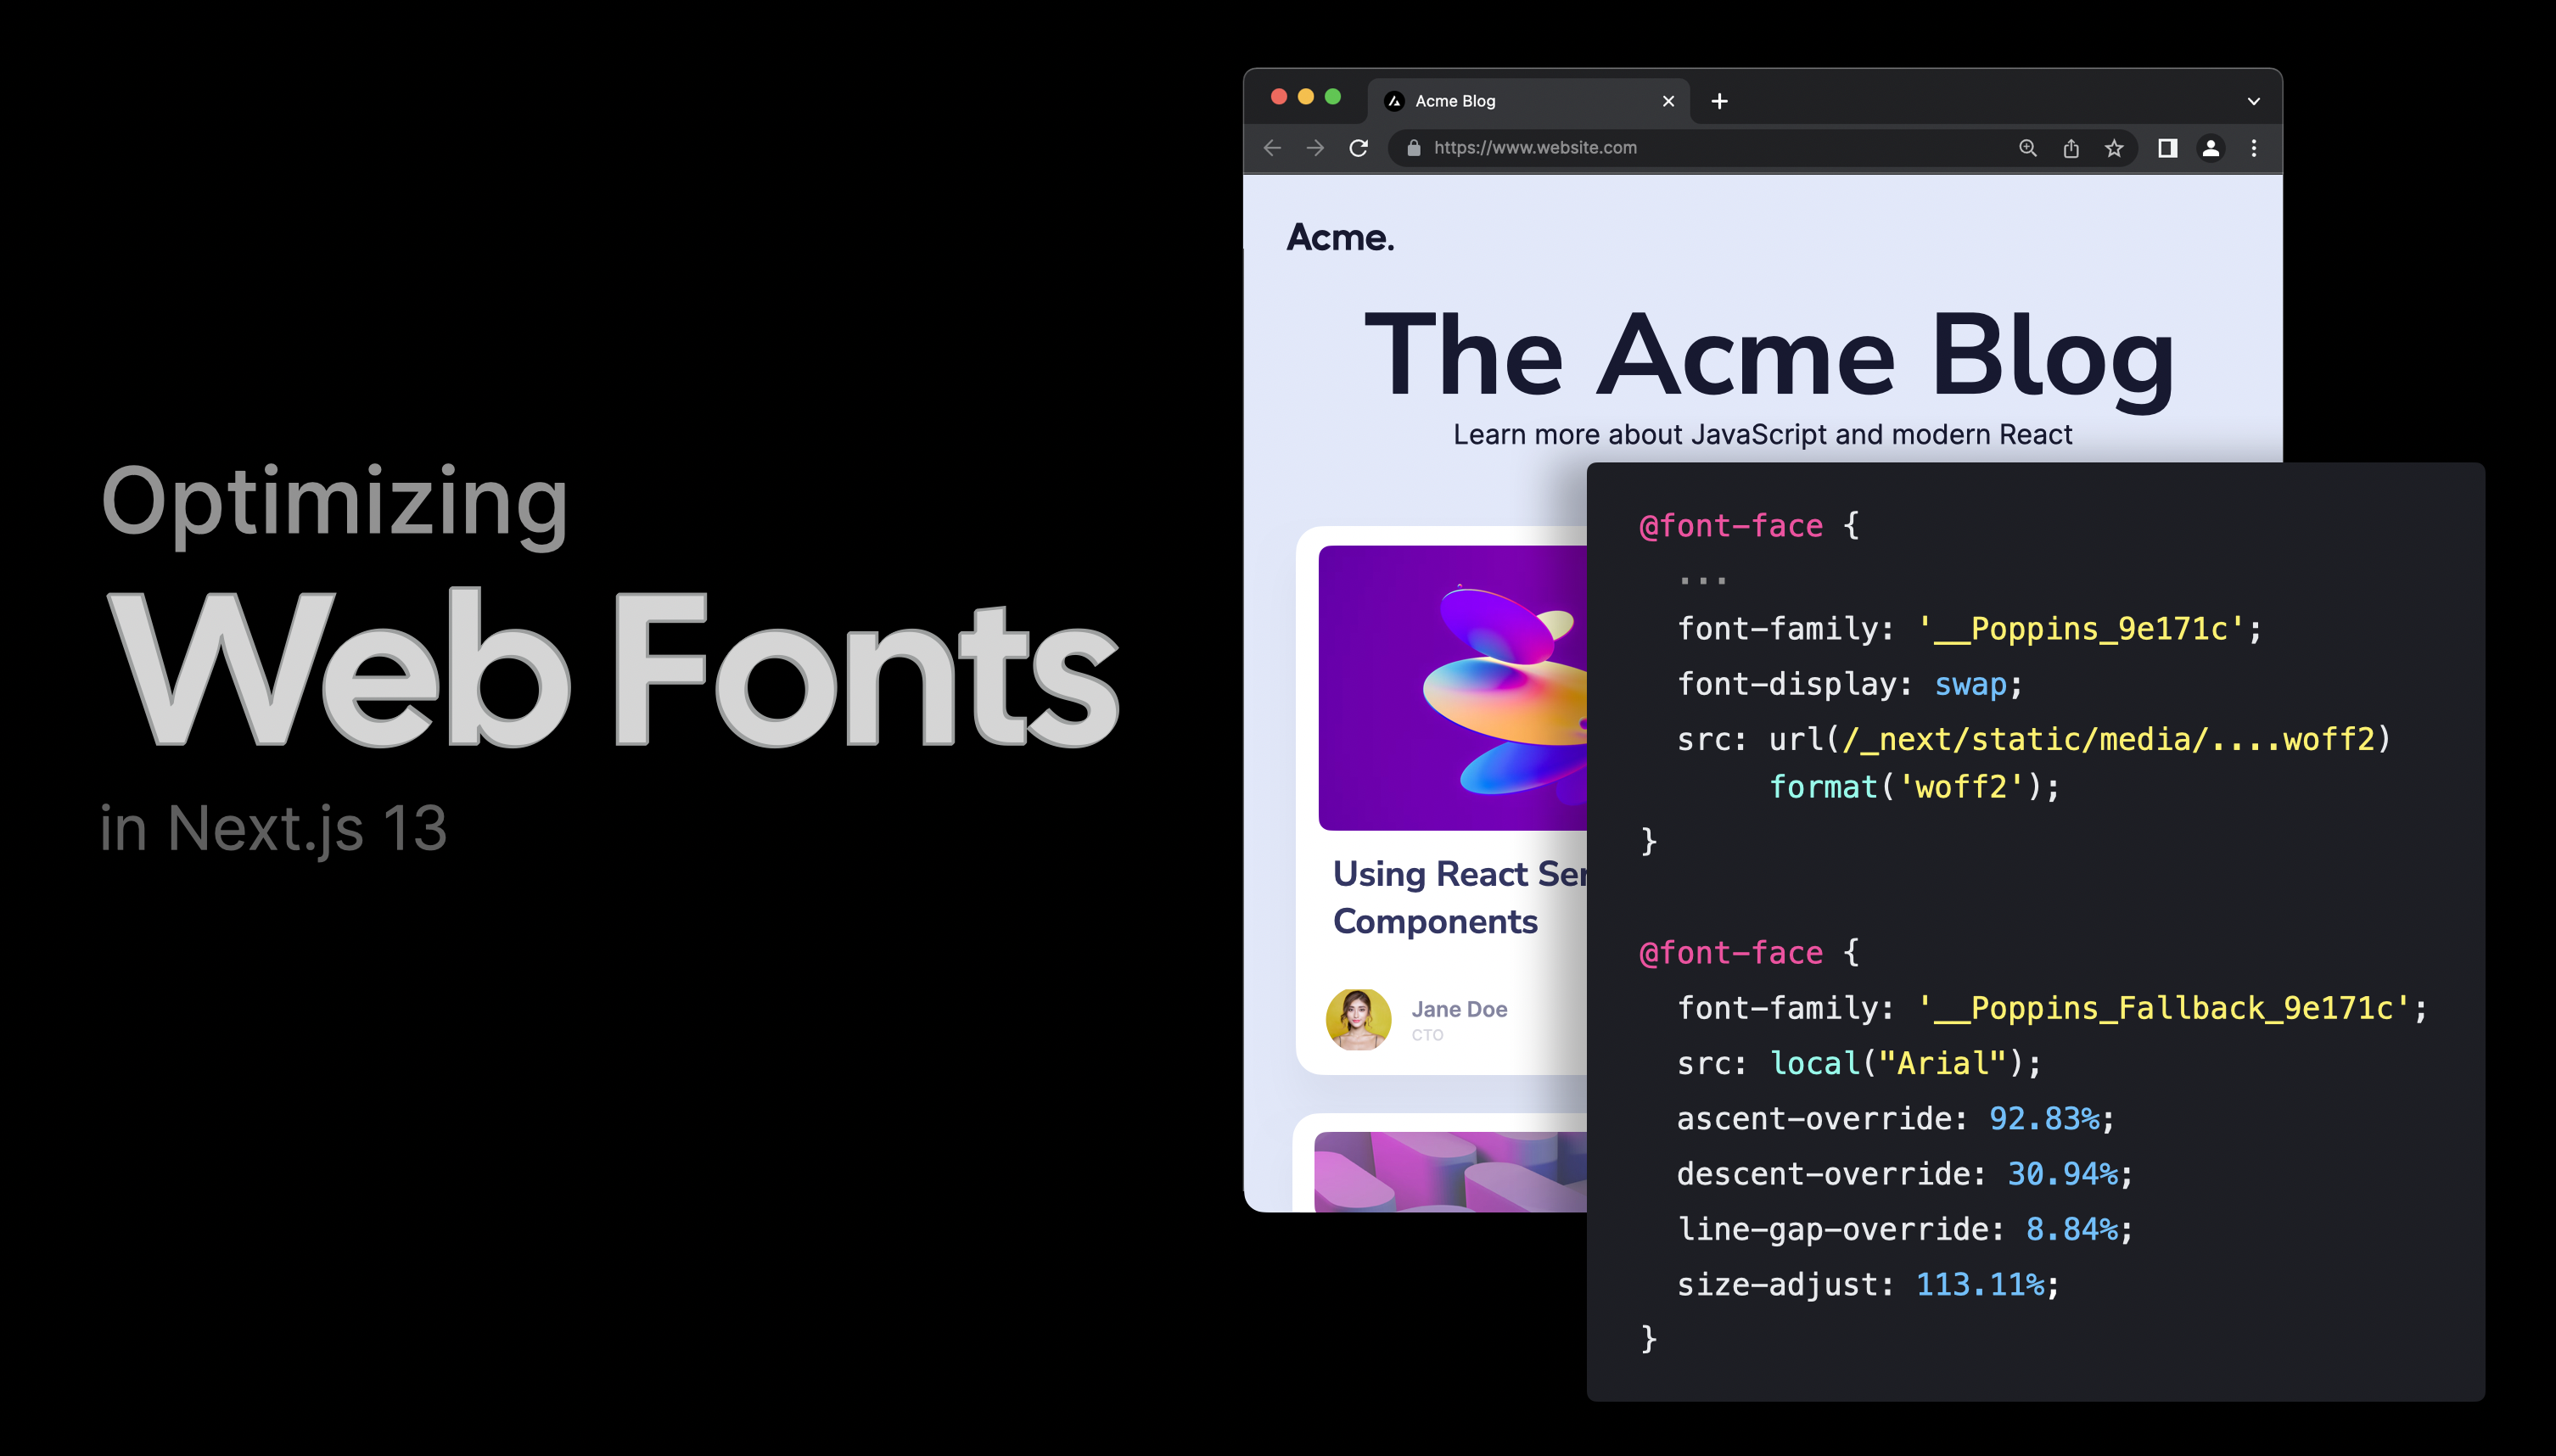 Optimizing Web Fonts in Next.js 13 by Lydia Hallie